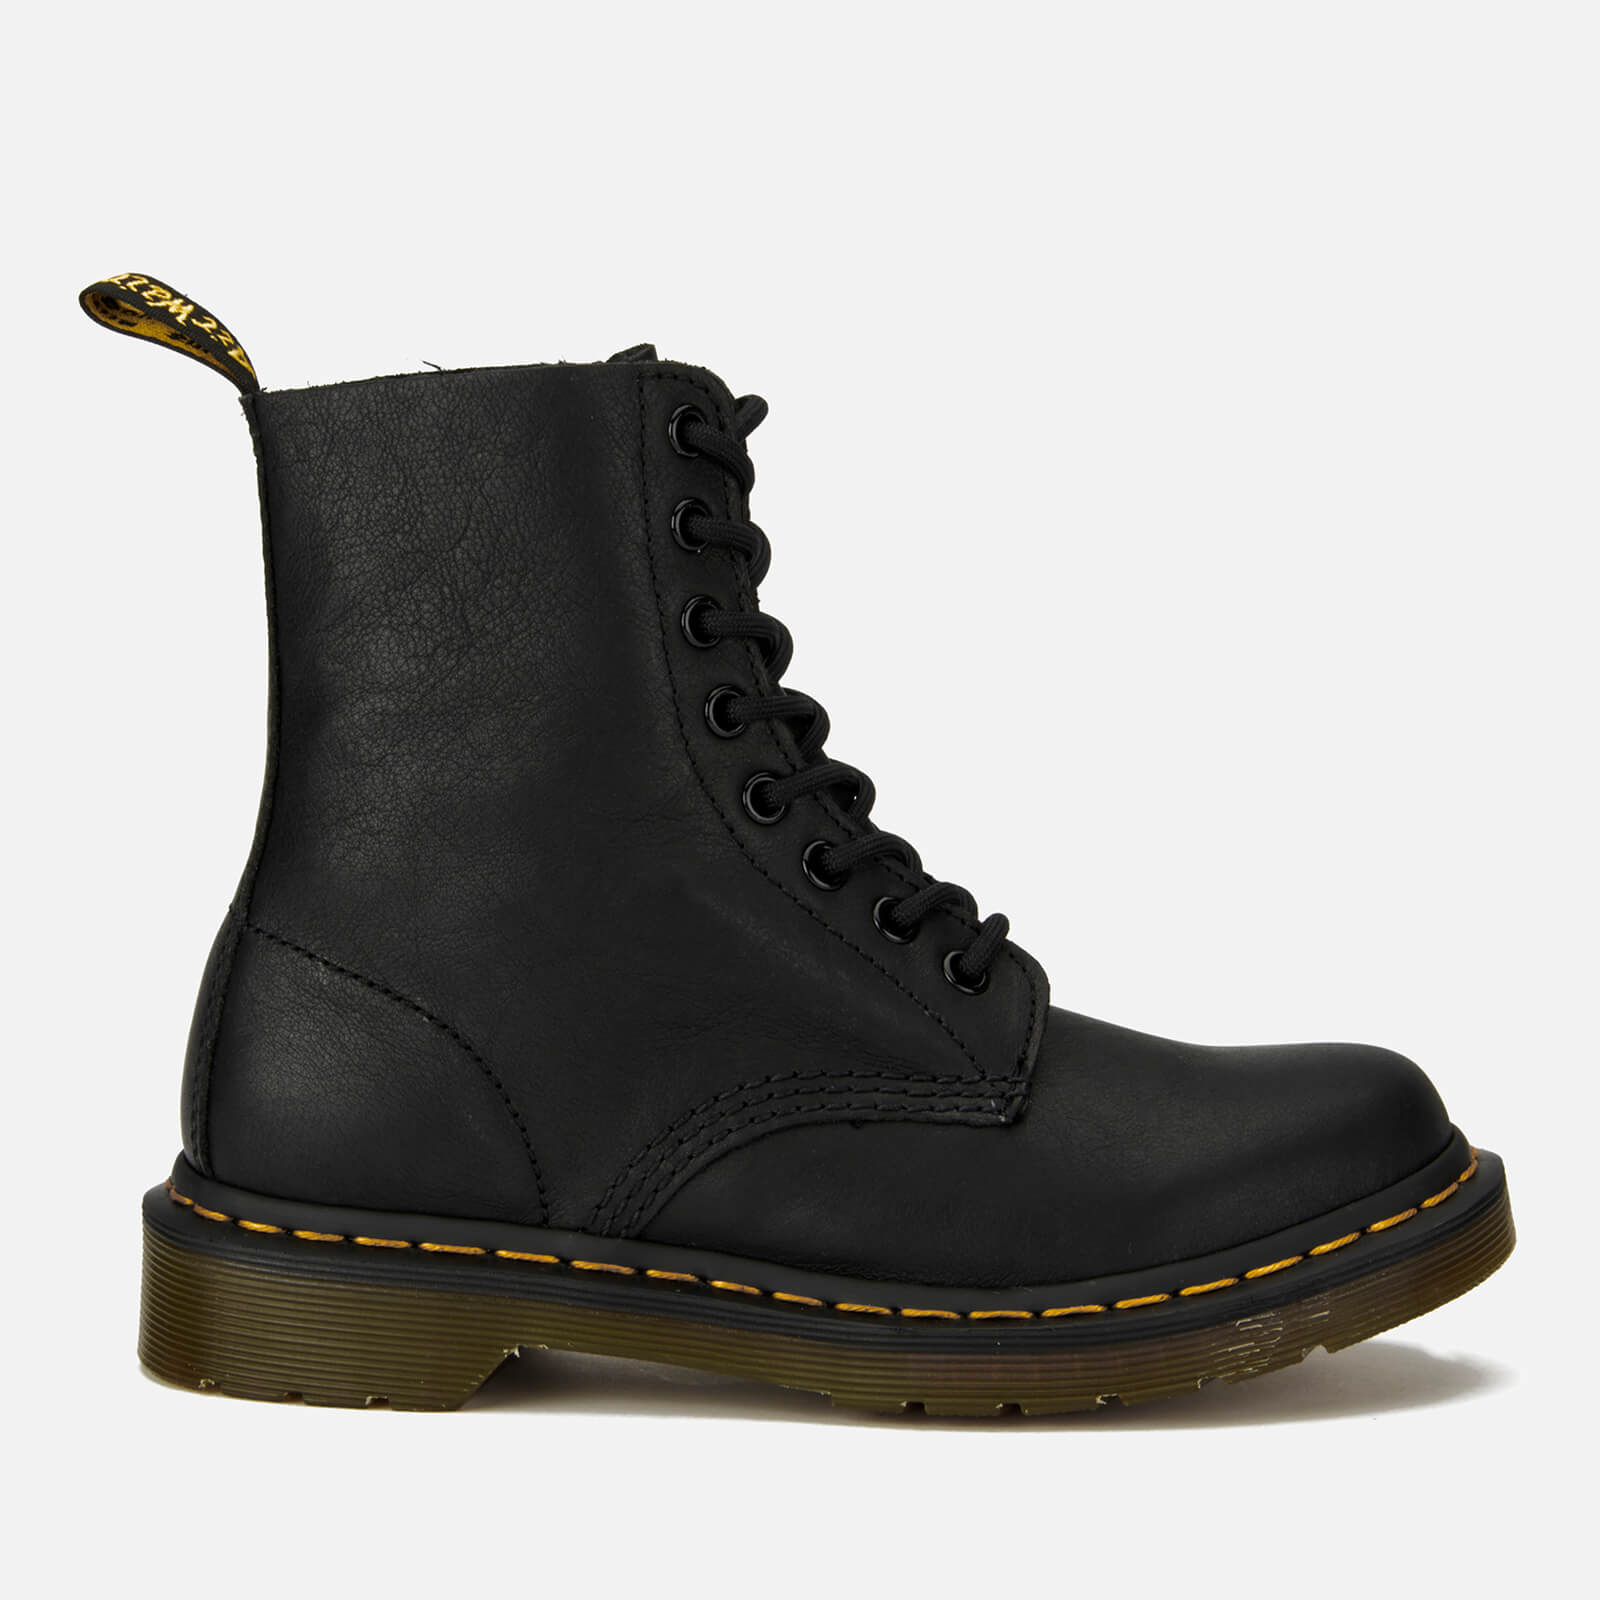 Dr. Martens Women’s 1460 Pascal Virginia Leather 8-Eye Boots - Black